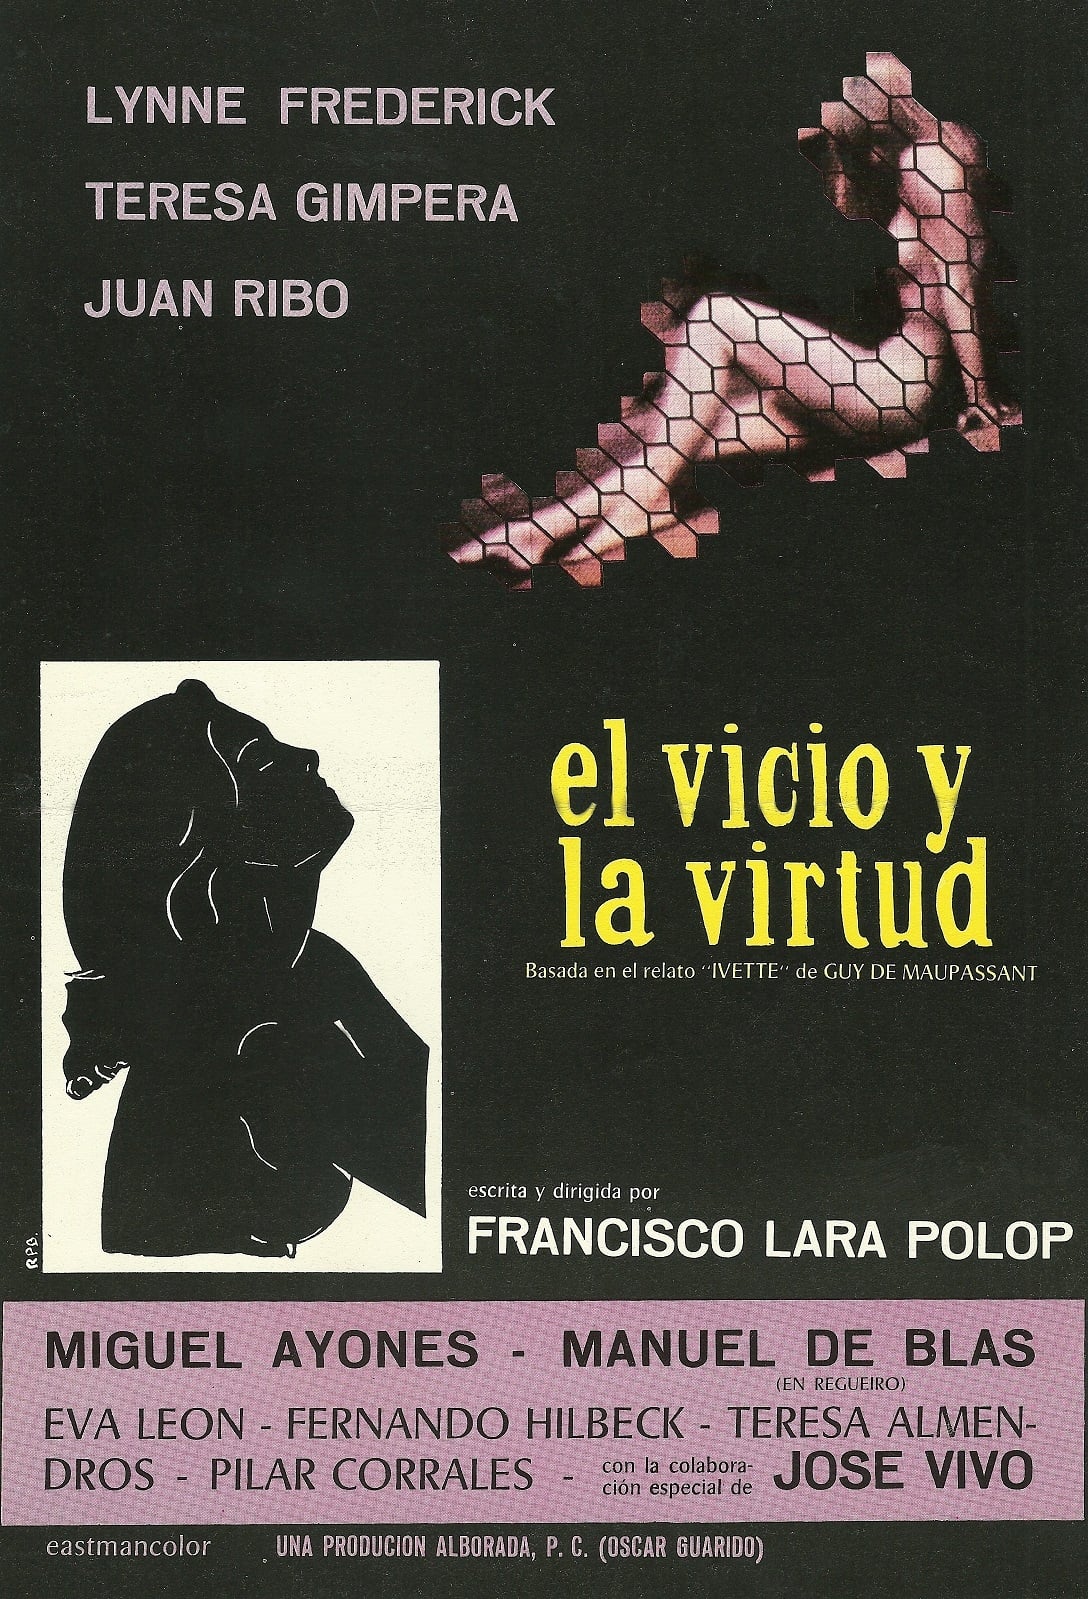 Vice and Virtue (1975)